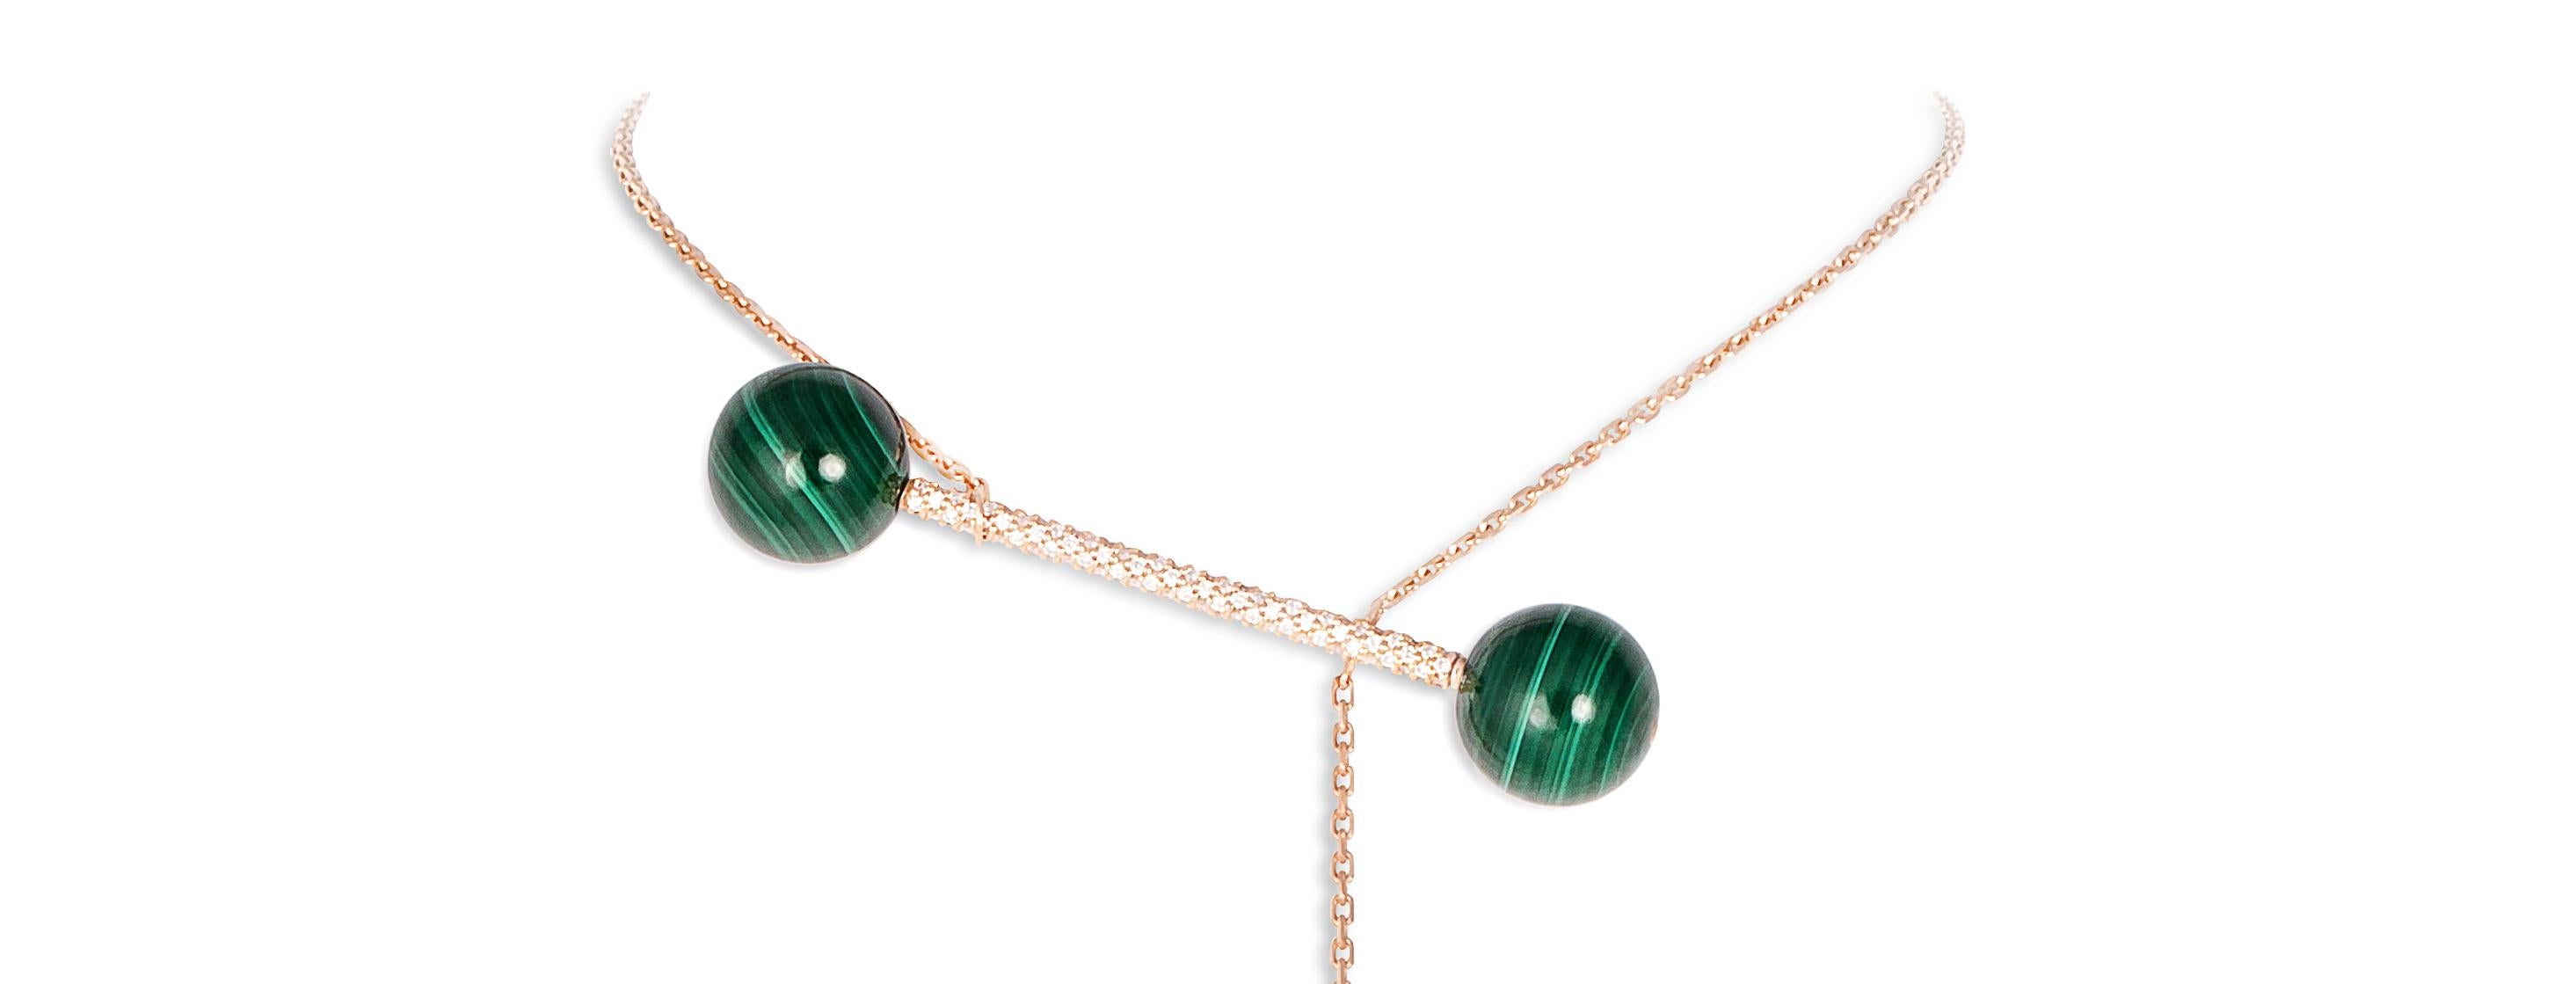 18 Carat Rose Gold Full Pavé Diamonds Necklace with Malachite. Adjustable Stone Pearls can be purchased separately for multiple looks. HAND CARVED STONES made from a specific unique designed. HANDCRAFTED IN FRANCE.
The Designer, Bénédicte, decided